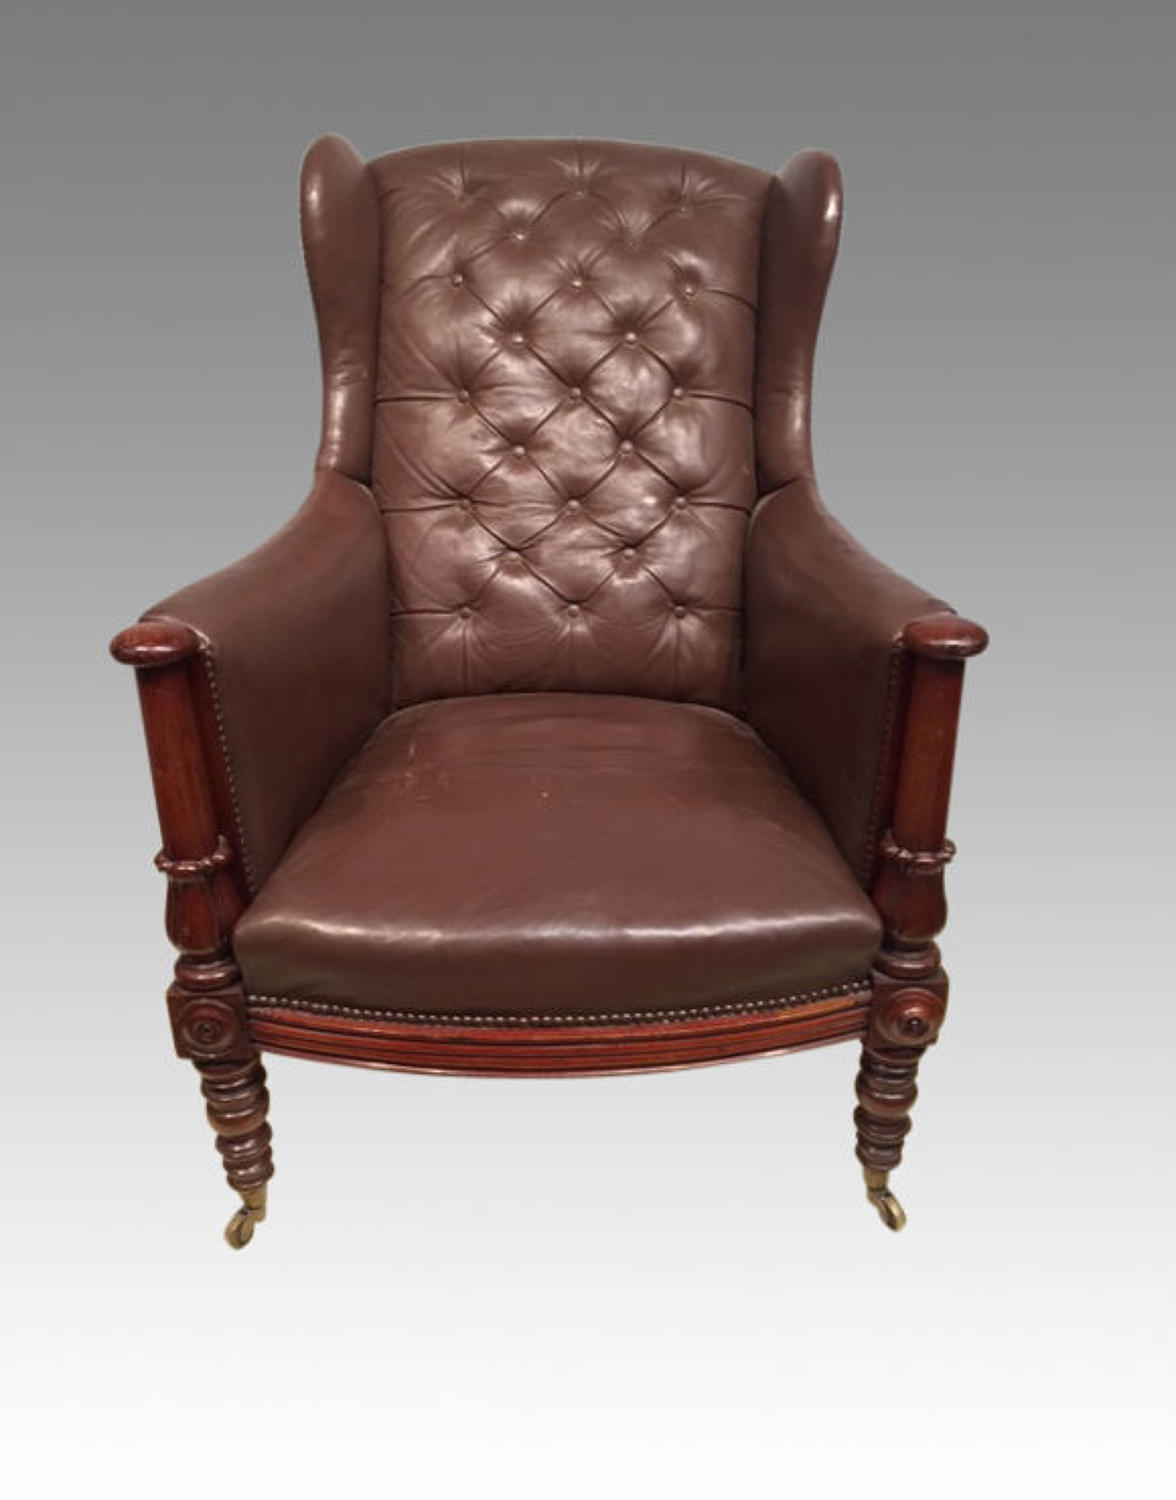 19th century antique  mahogany library chair.